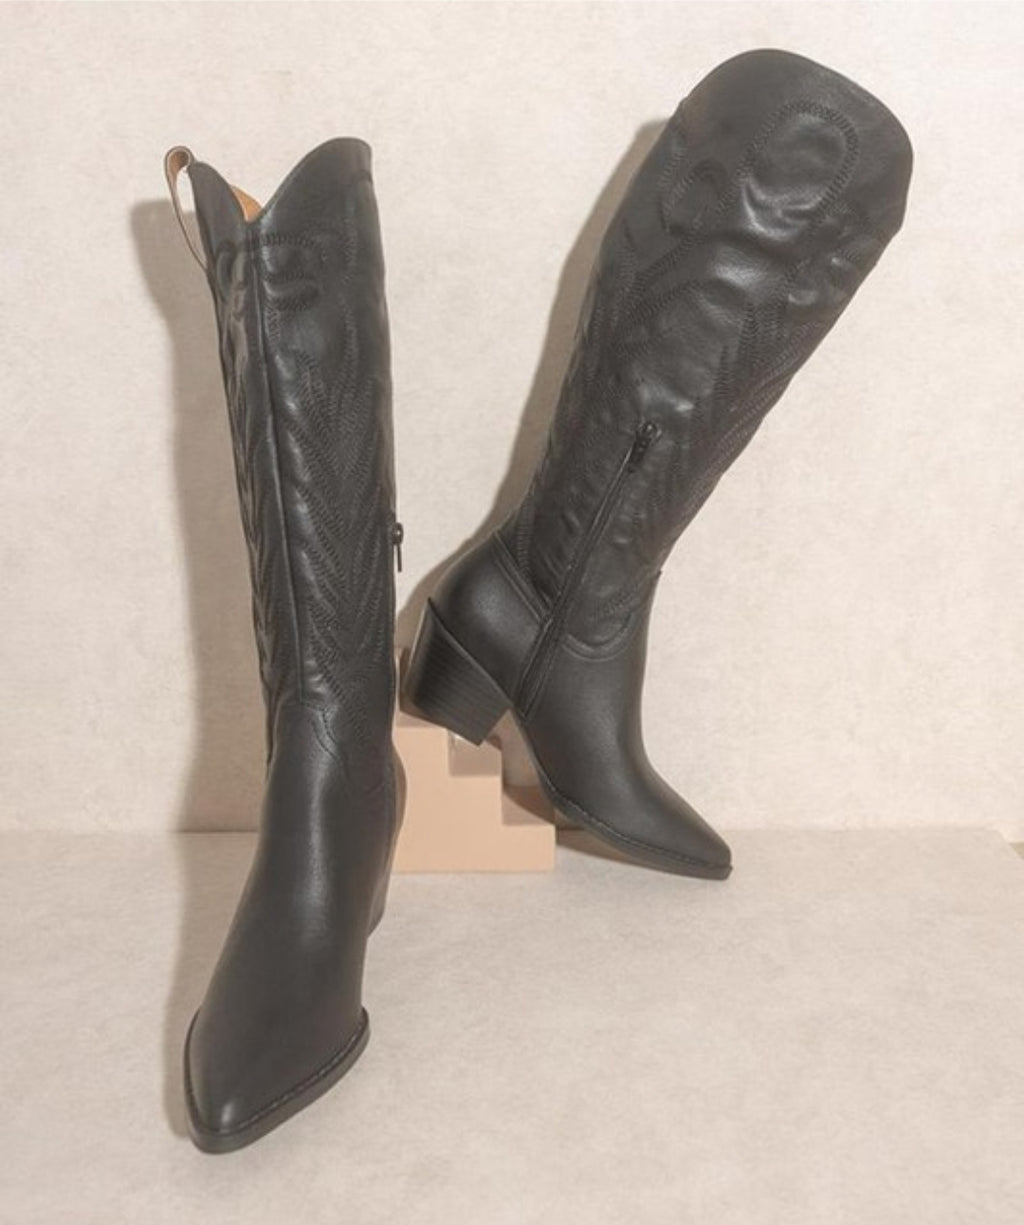 Basic Cowgirl Boots (Black)